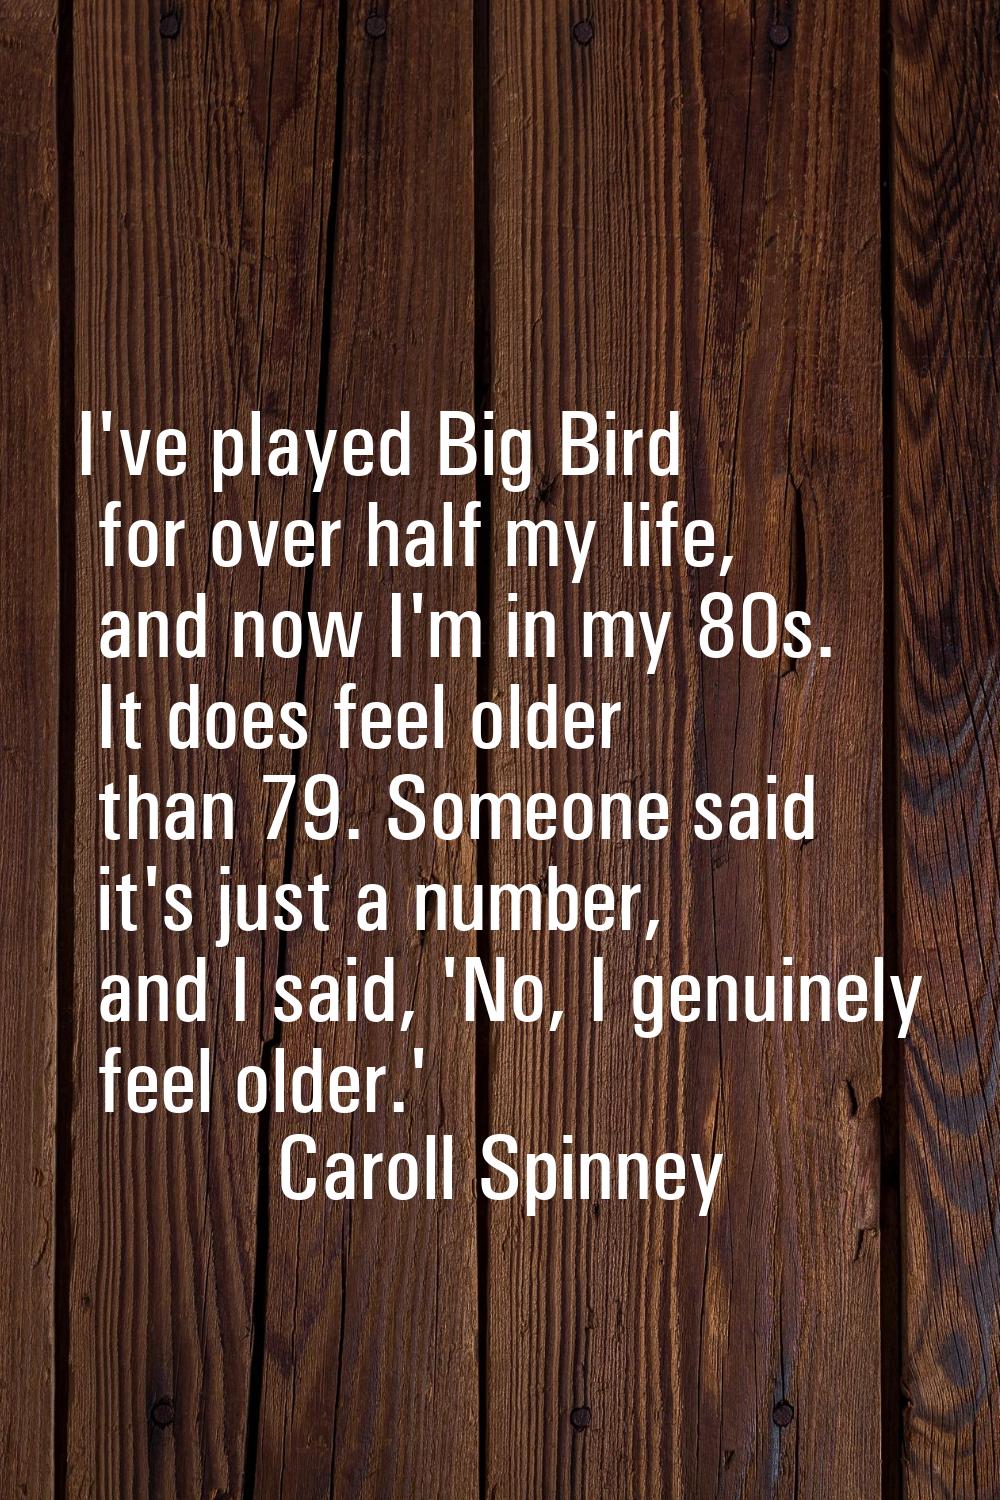 I've played Big Bird for over half my life, and now I'm in my 80s. It does feel older than 79. Some